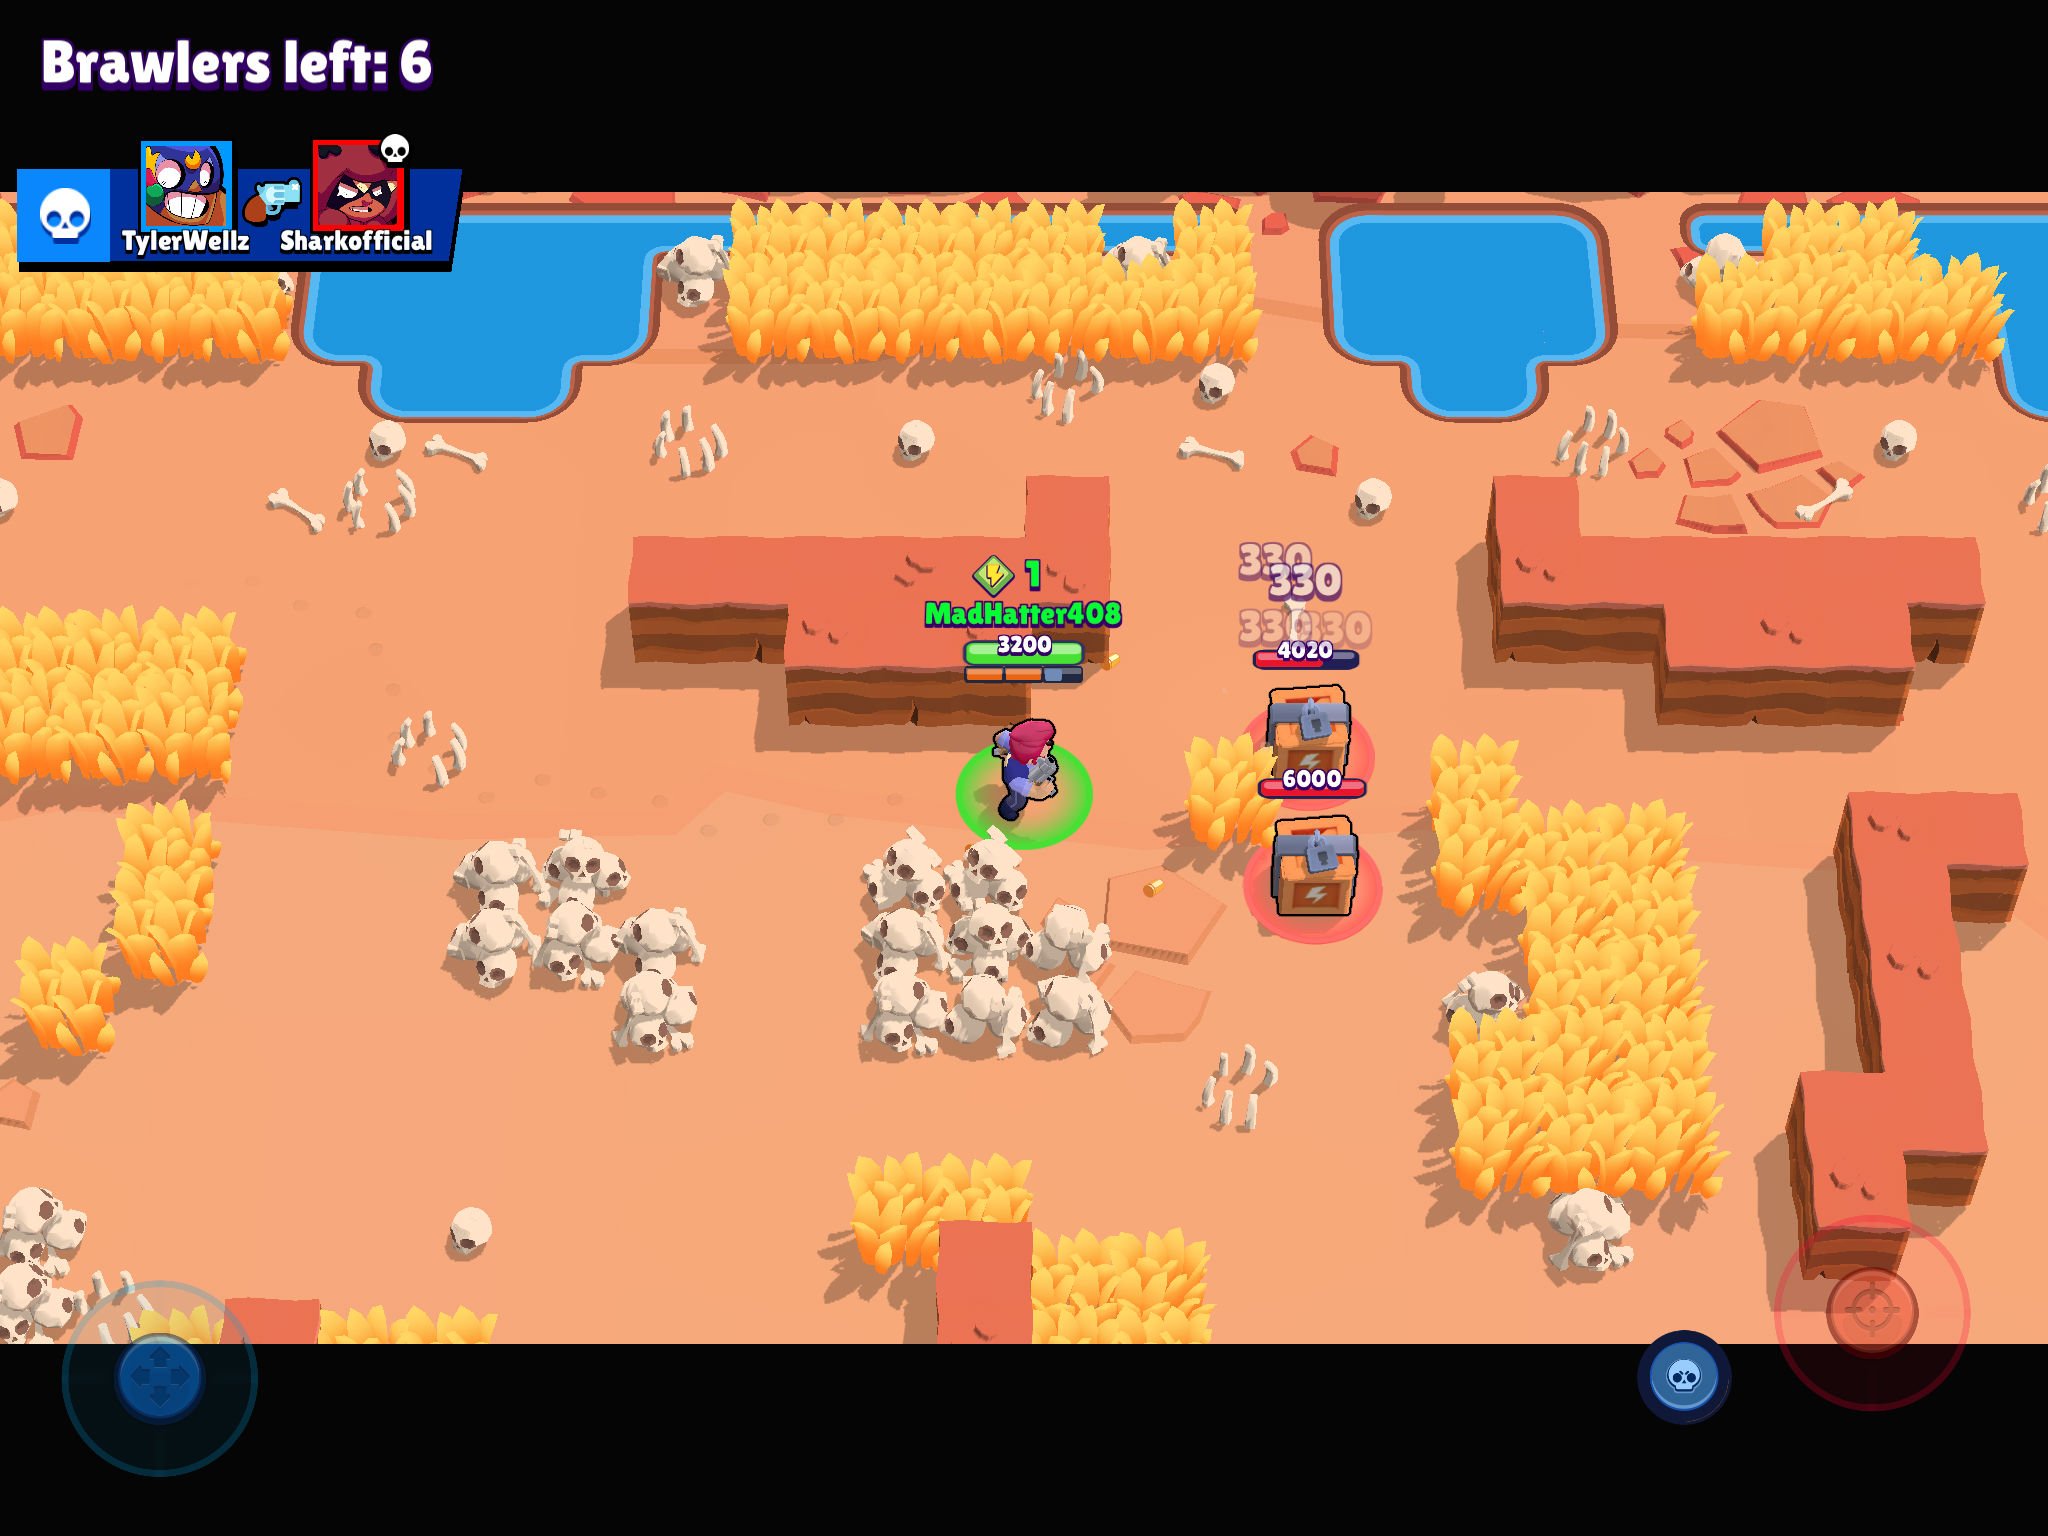 Brawl Stars Battle Royale Guide Everything You Need To Know About Showdown Mode Gameup24 - brawl stars team showdown